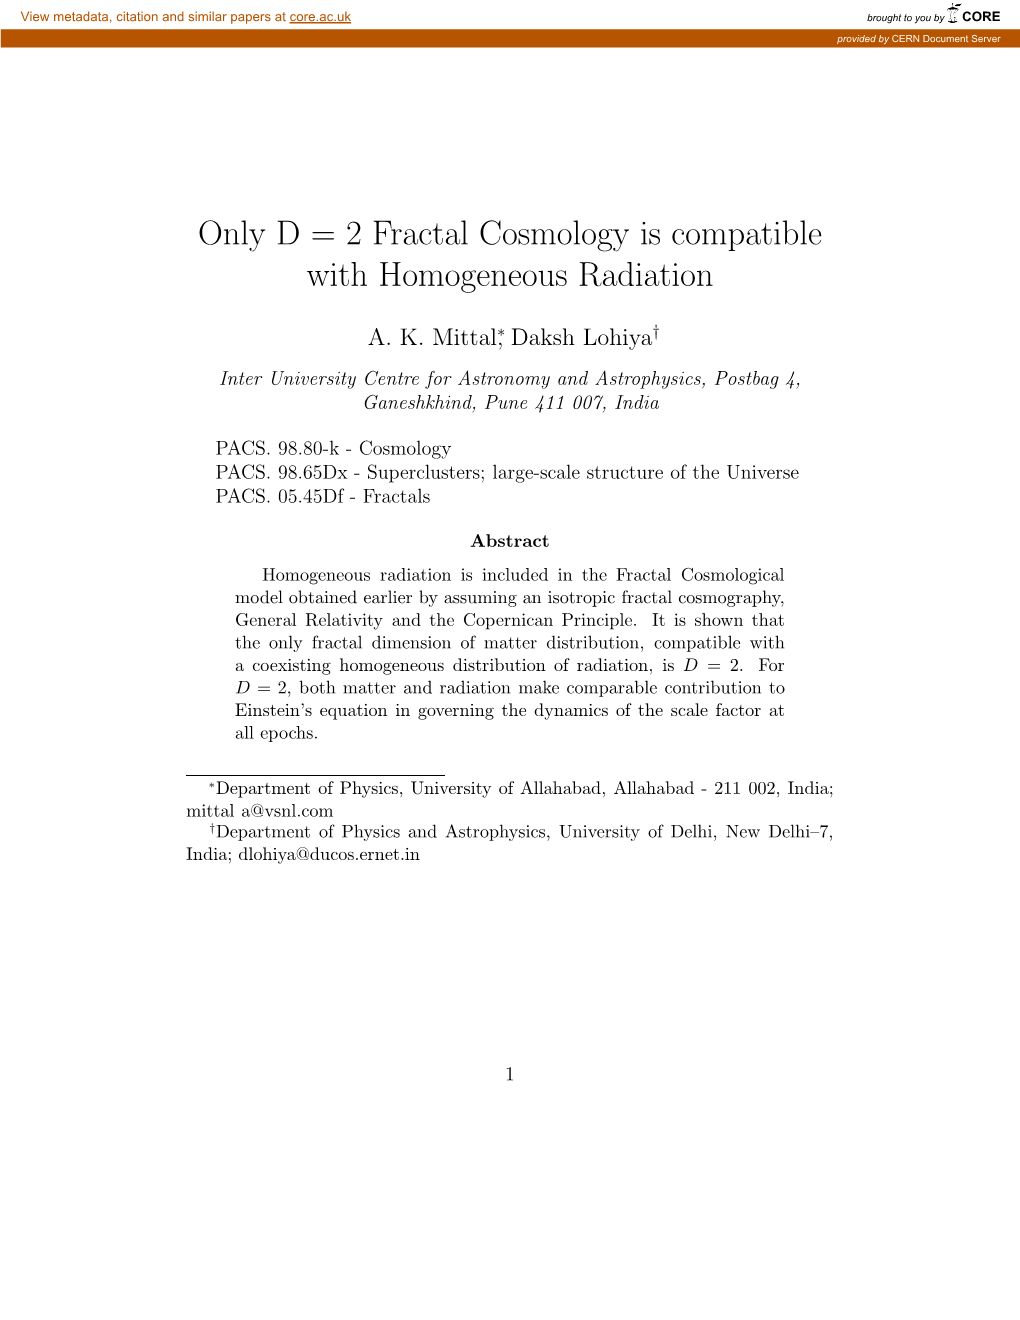 Only D = 2 Fractal Cosmology Is Compatible with Homogeneous Radiation